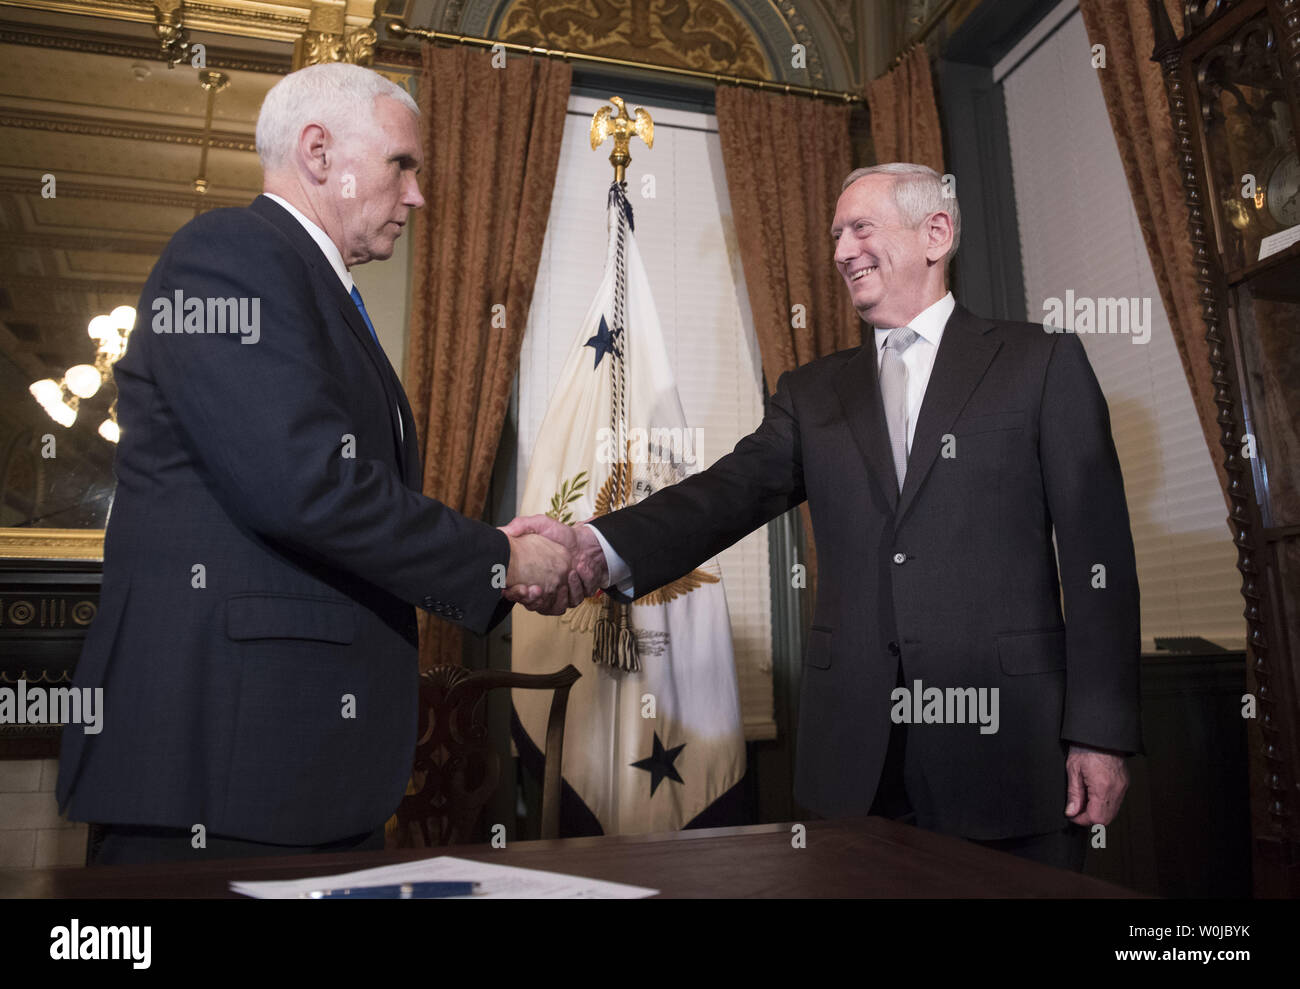 Marine Corps General James Mattis shakes hands with Vice President Mike Pence after being sworn-in as Defense Secretary, in the Vice Presidential ceremonial office in the Executive Office Building in Washington, D.C. on January 20, 2017. Photo by Kevin Dietsch/UPI Stock Photo